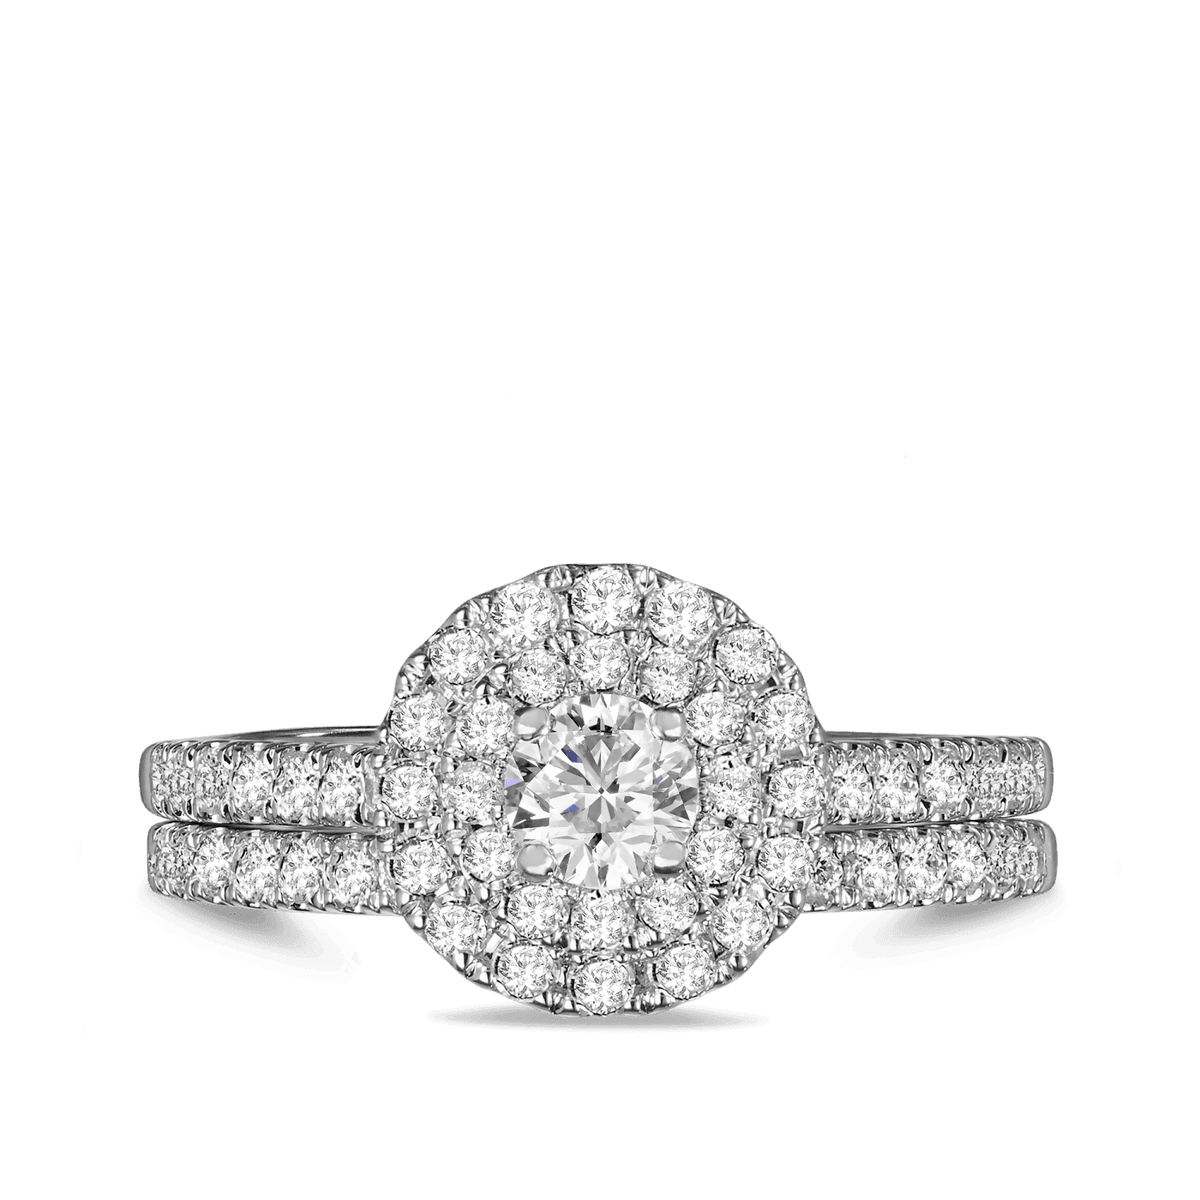 1ct TDW Round Brilliant Cut Diamond Double Halo Engagement & Wedding Bridal Set Rings in 9ct White Gold - Wallace Bishop